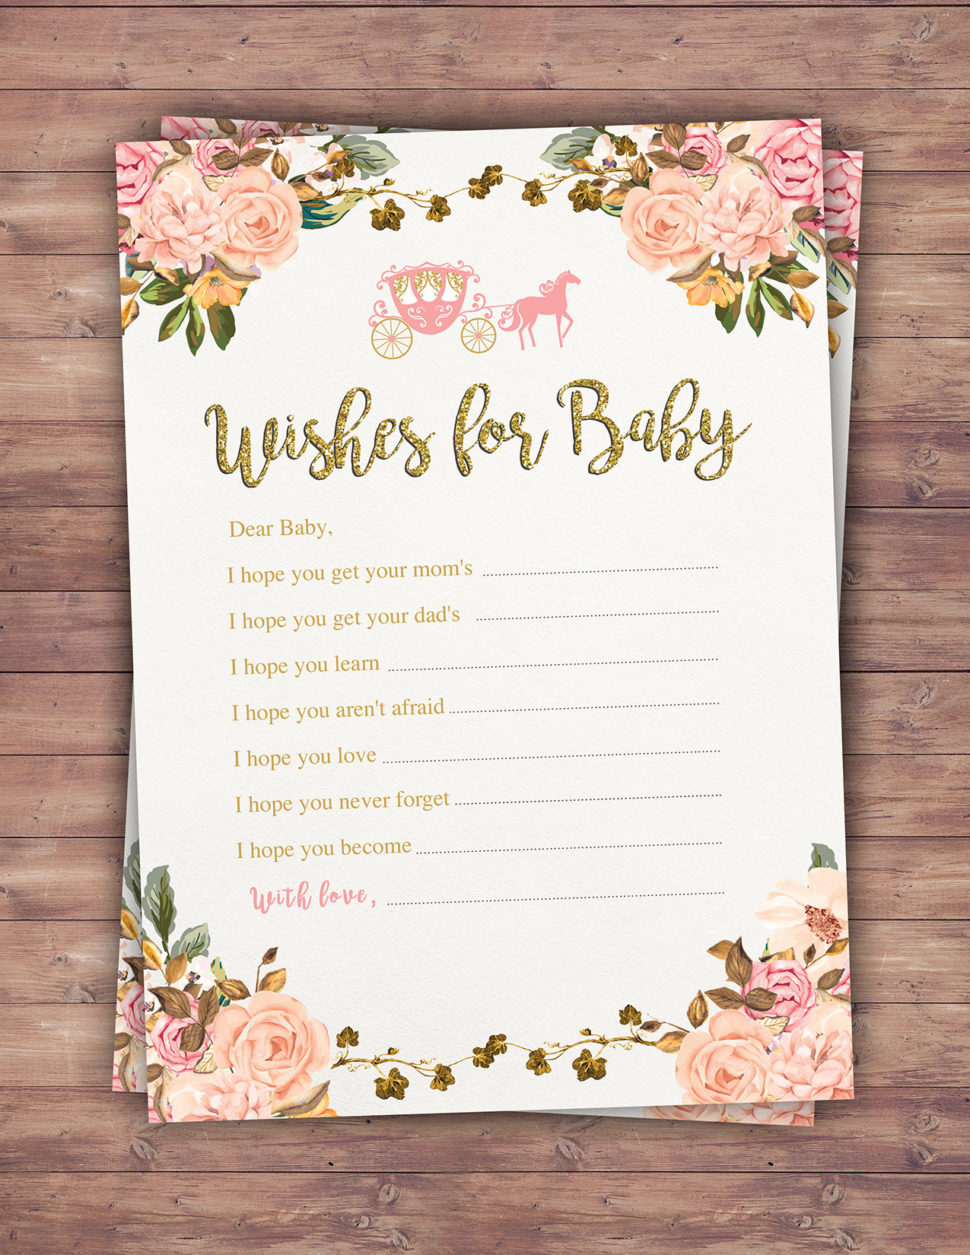 Medium Size of Baby Shower:stylish Baby Shower Wishes Picture Inspirations Baby Shower Wishes Personalized Baby Shower Baby Shower Ideas For Boys Baby Shower Songs Baby Shower Fiesta Ideas Baby Shower Wishes Card Wishes For Baby Princess Baby Shower Pink Gold Glitter Princess Baby Shower Game